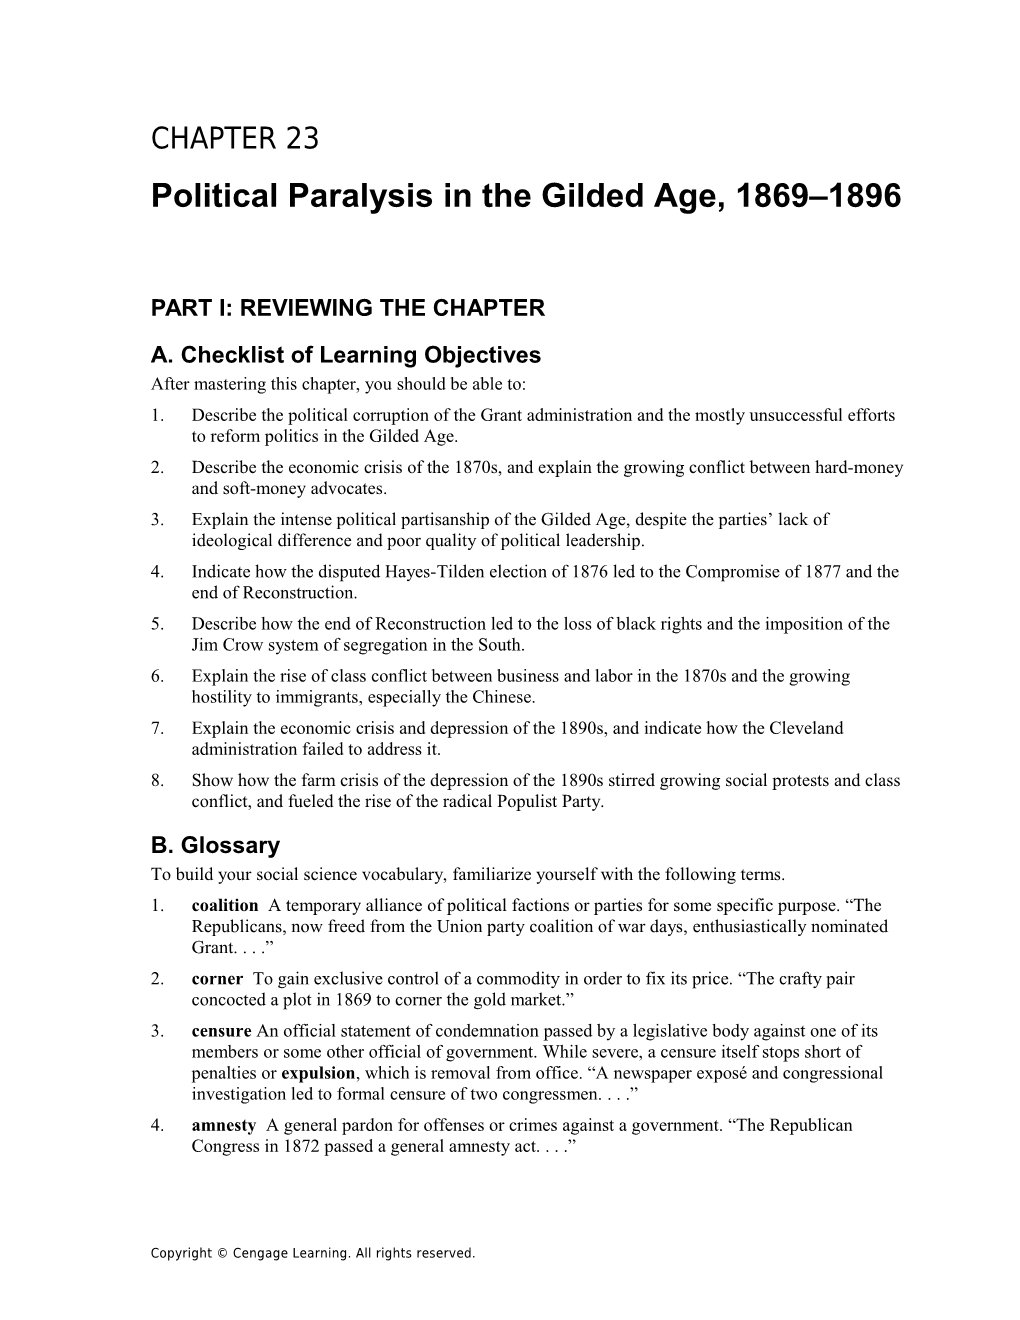 Chapter 23: Political Paralysis in the Gilded Age, 1869 1896 1